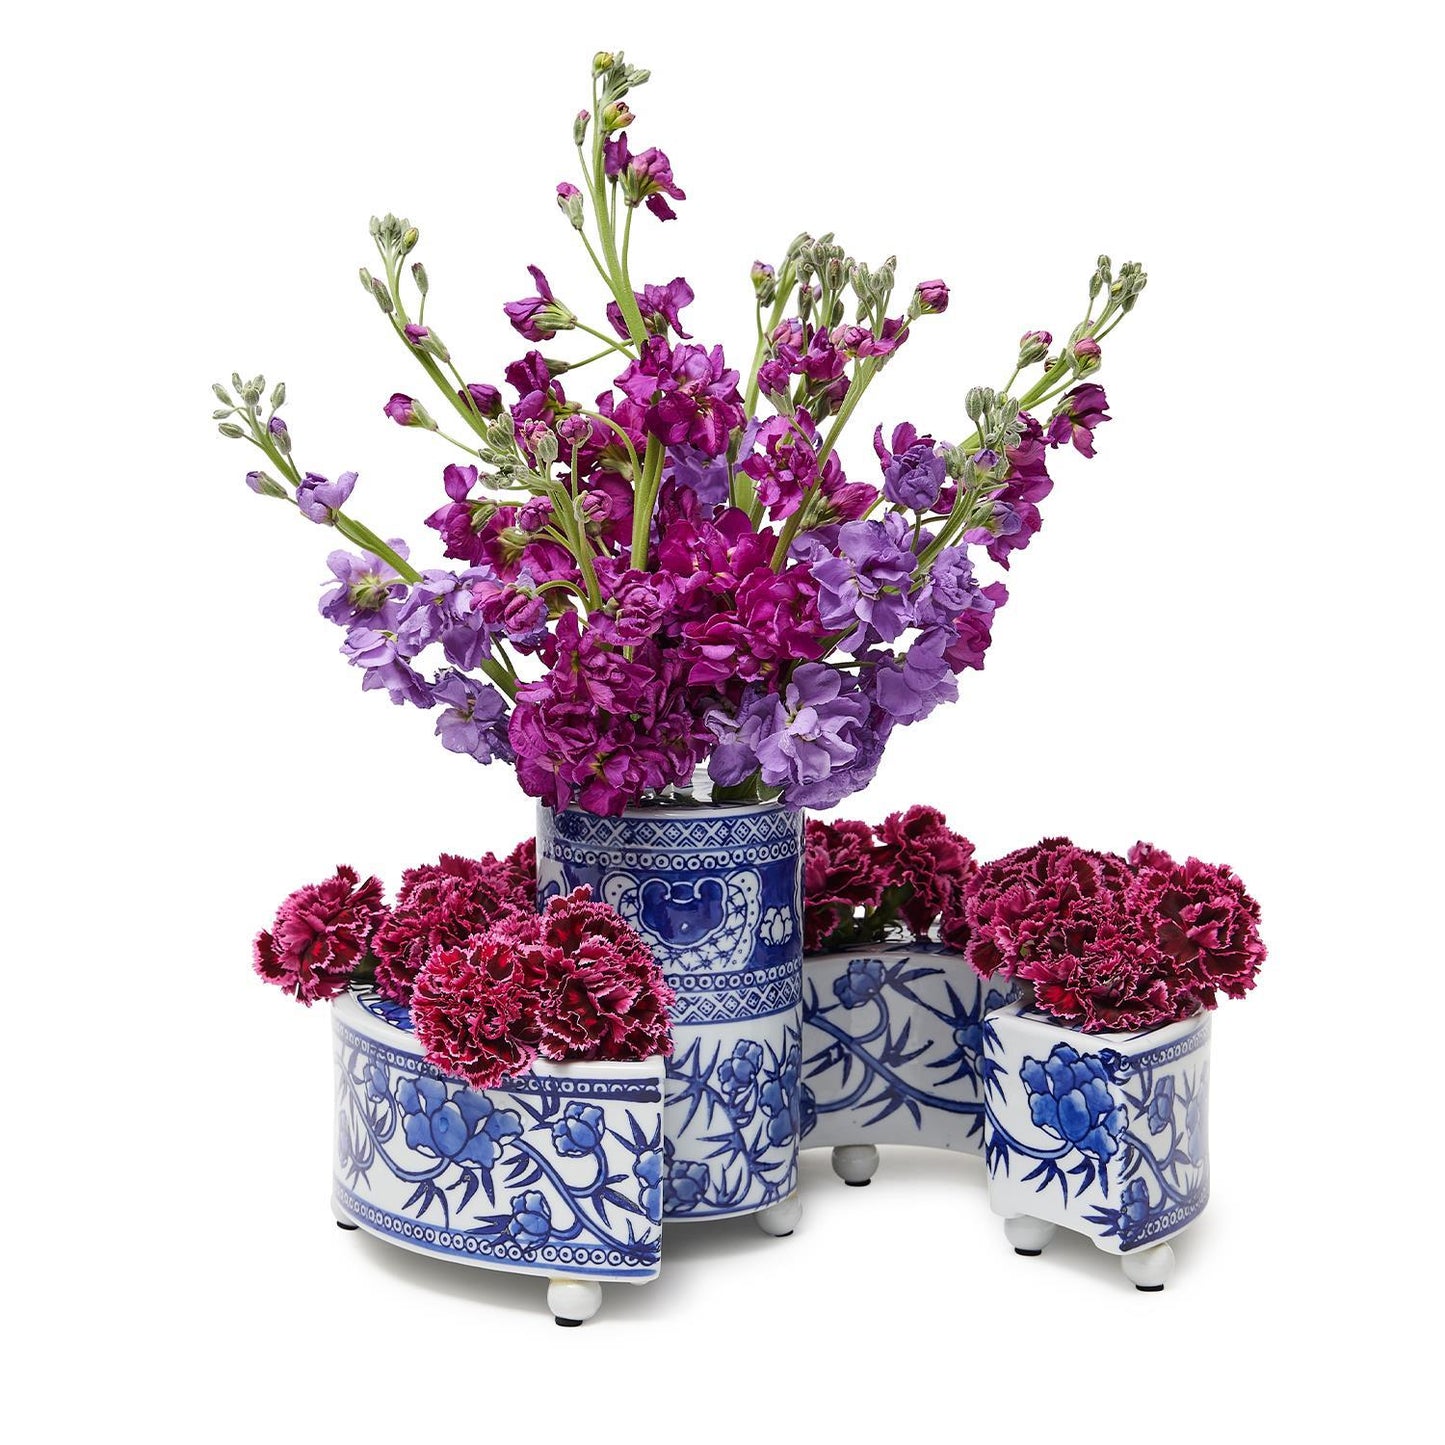 Blue and White Hand-Painted Floral Arranger Set